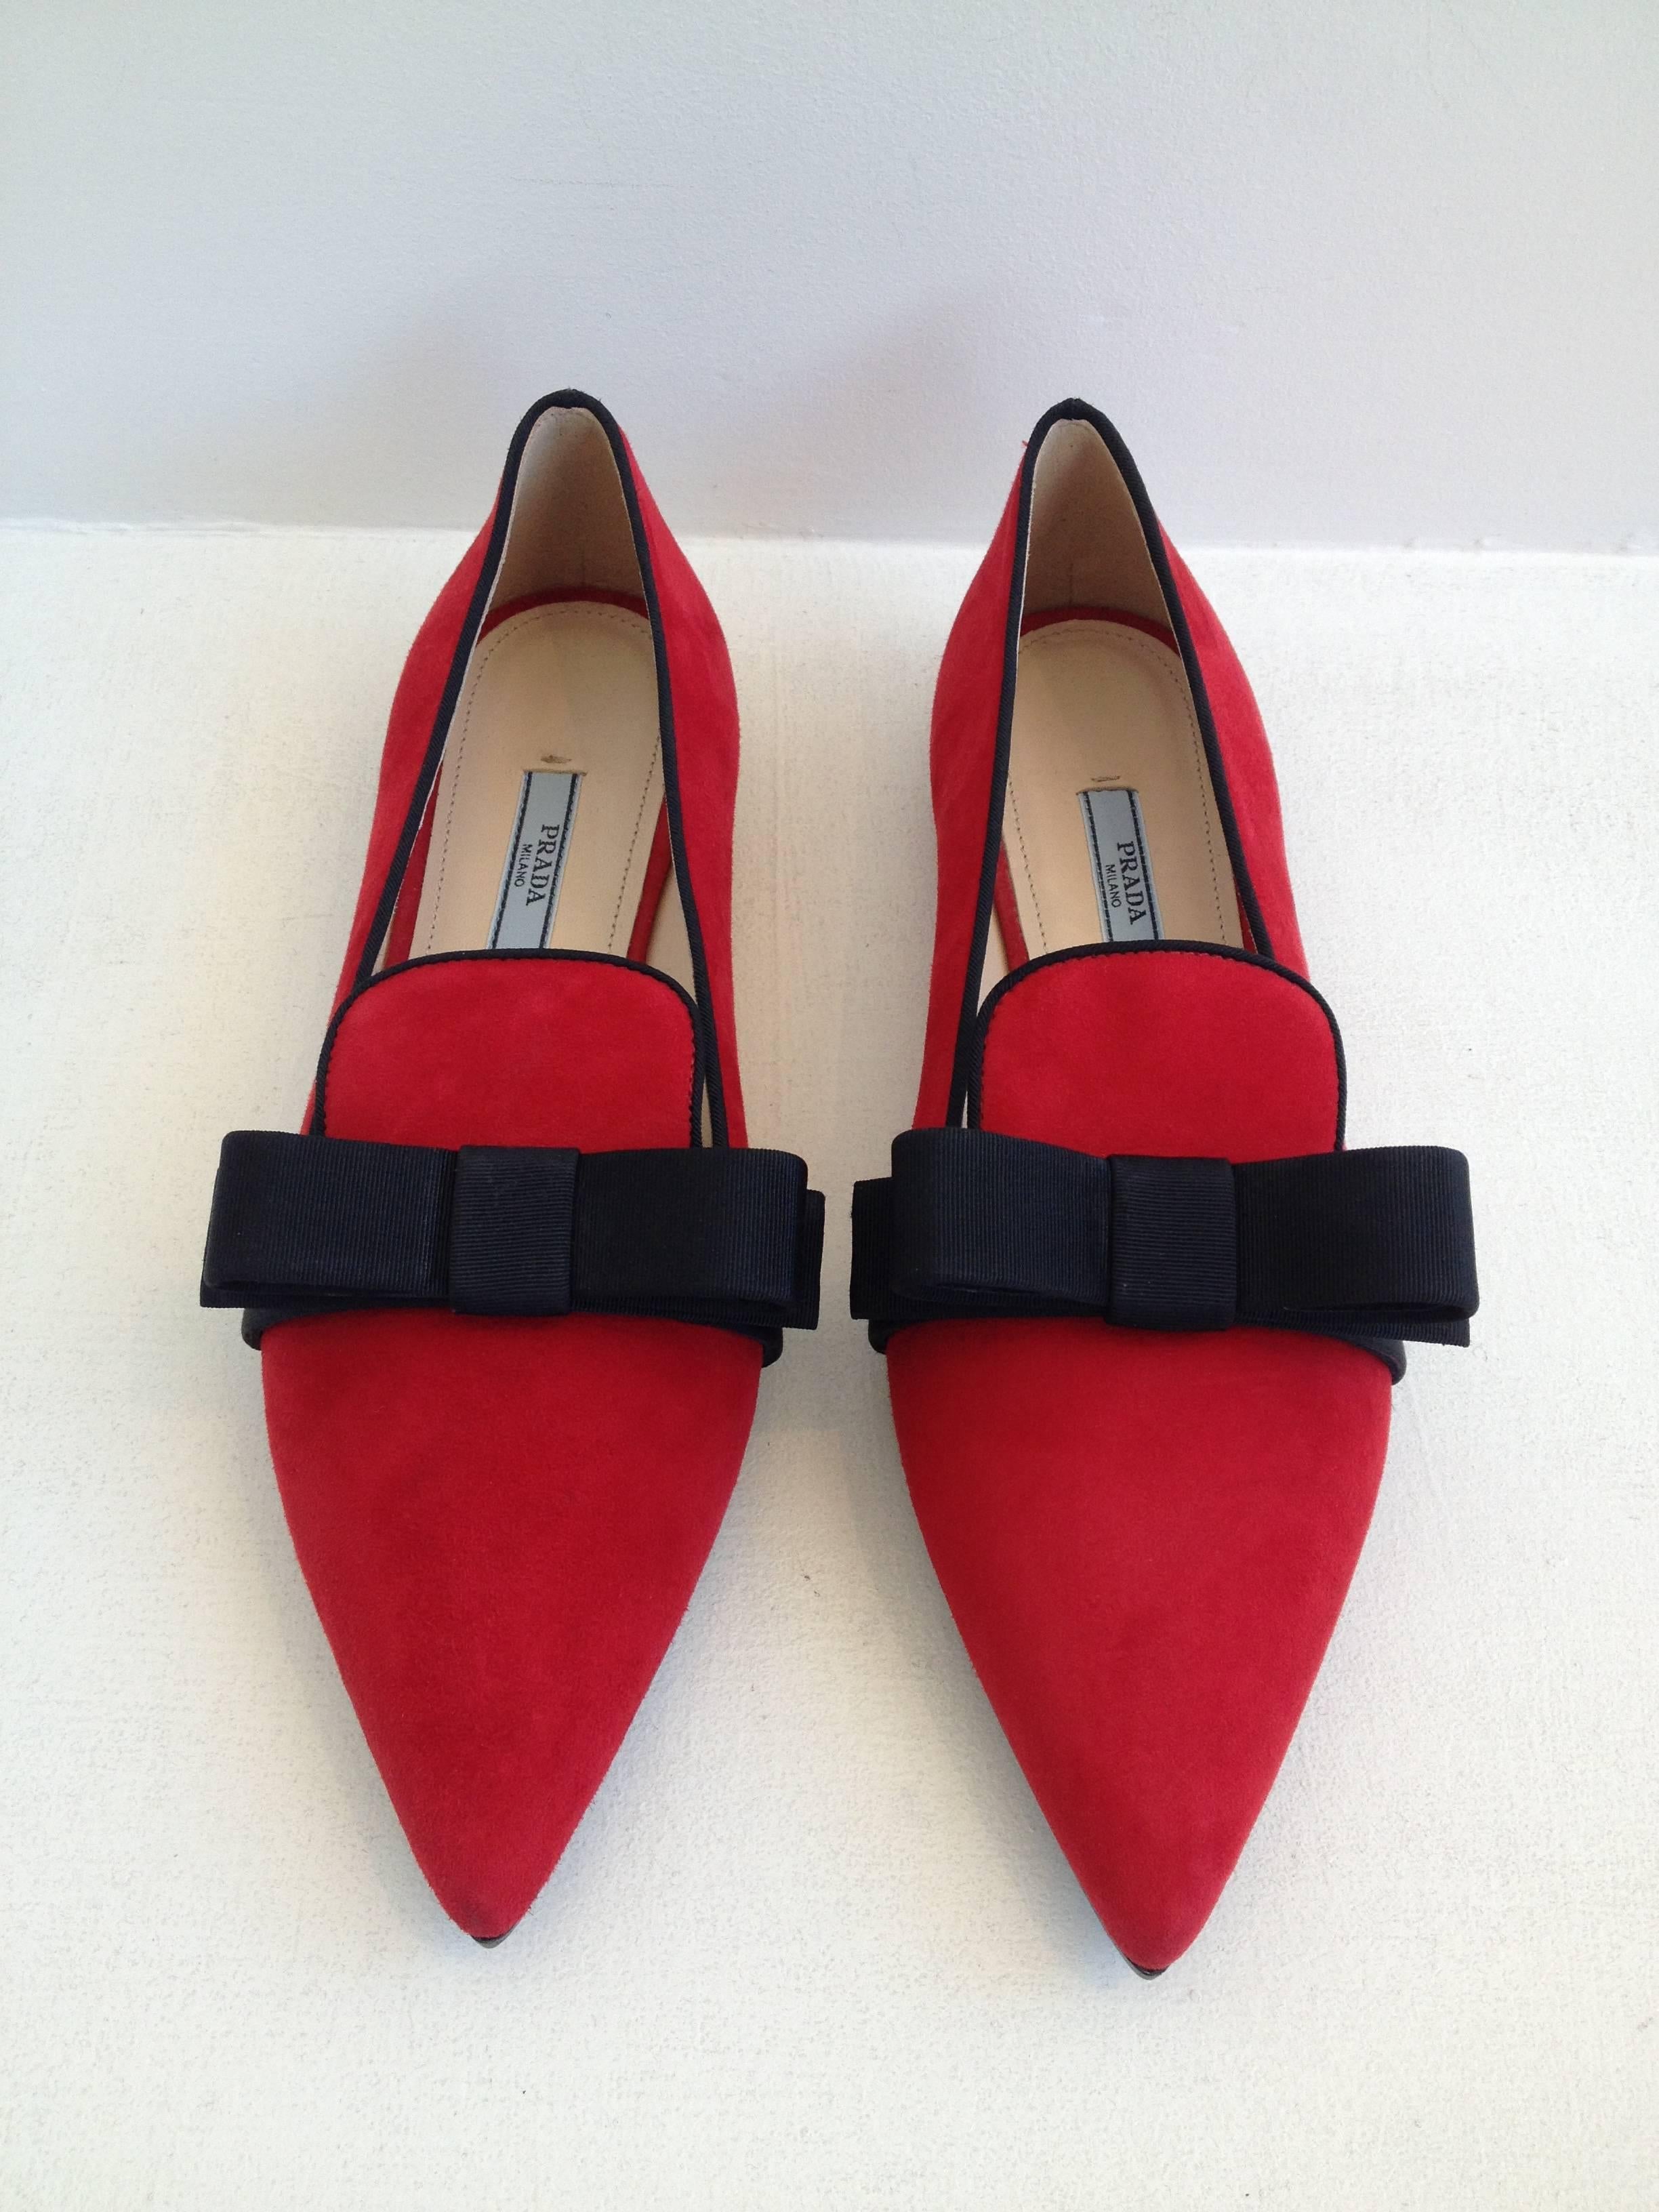 Nothing adds quite so much fun to your look as a pair of red suede smoking shoes. These are trimmed with oversized black grosgrain bows on each pointy toe, adding the perfect contrast to the red. Wear with anything from a party dress to black pants